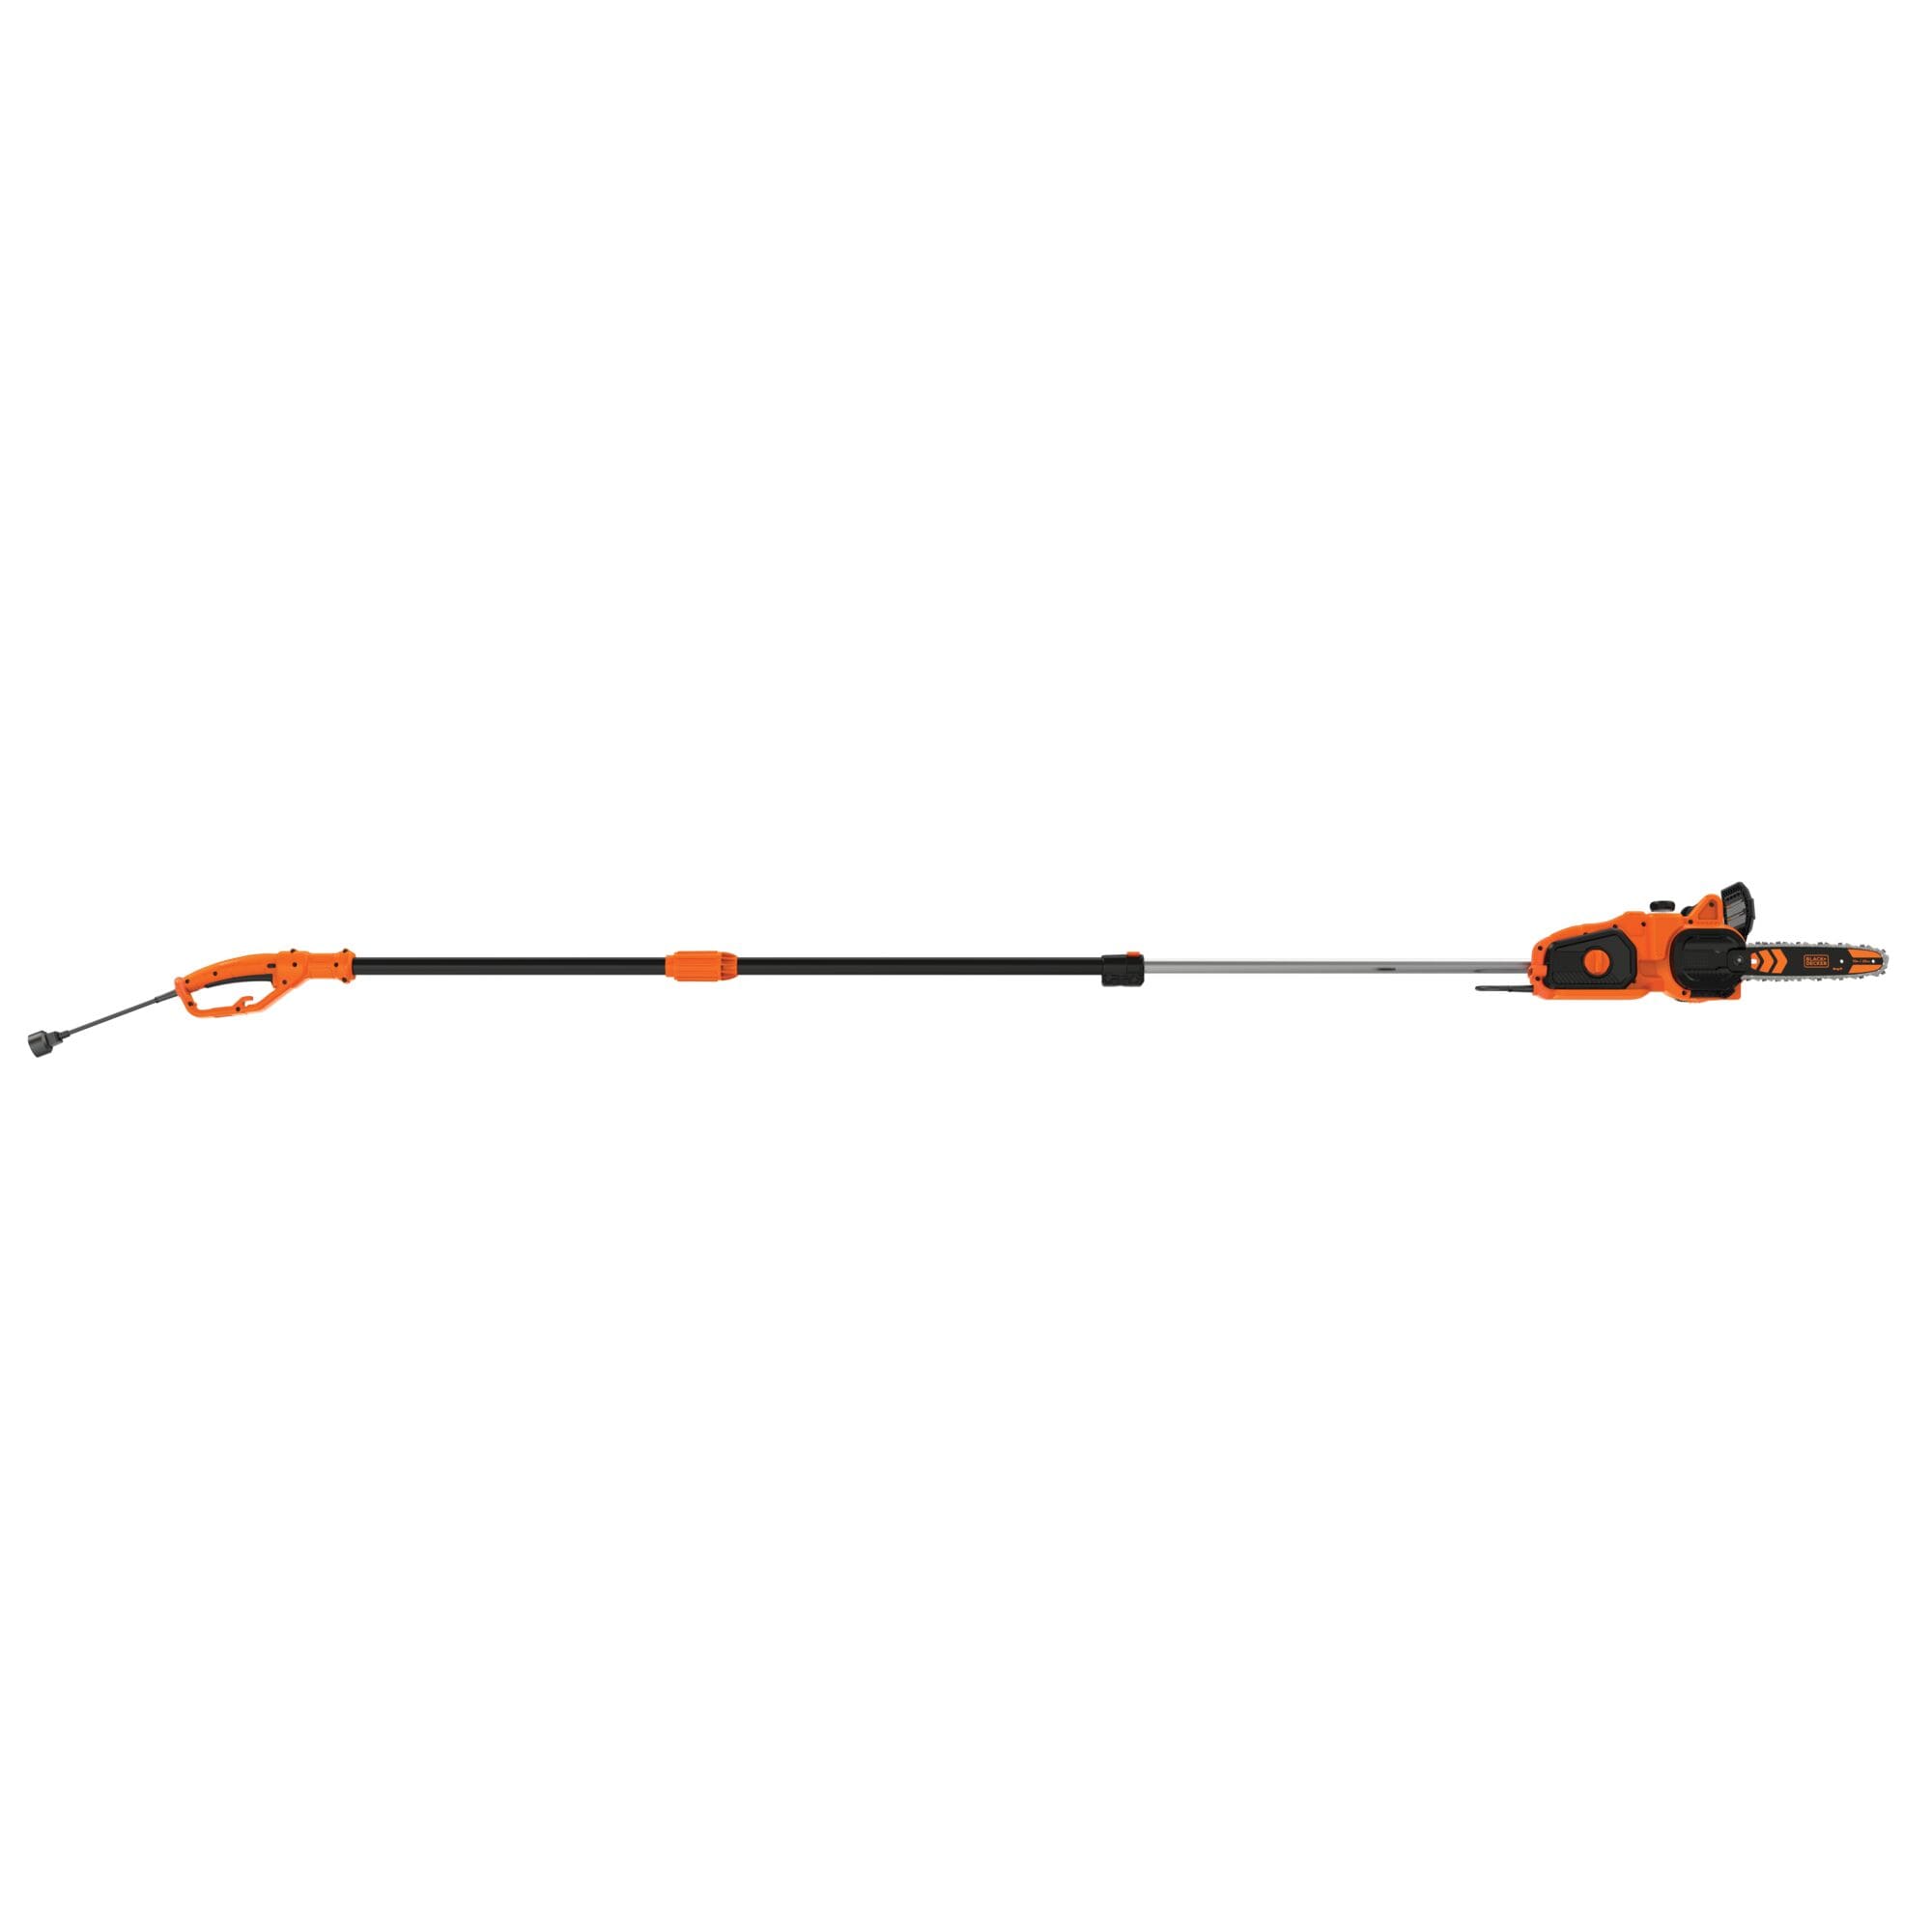 BLACK+DECKER 10 in. 6.5 AMP Corded Electric Pole Saw with